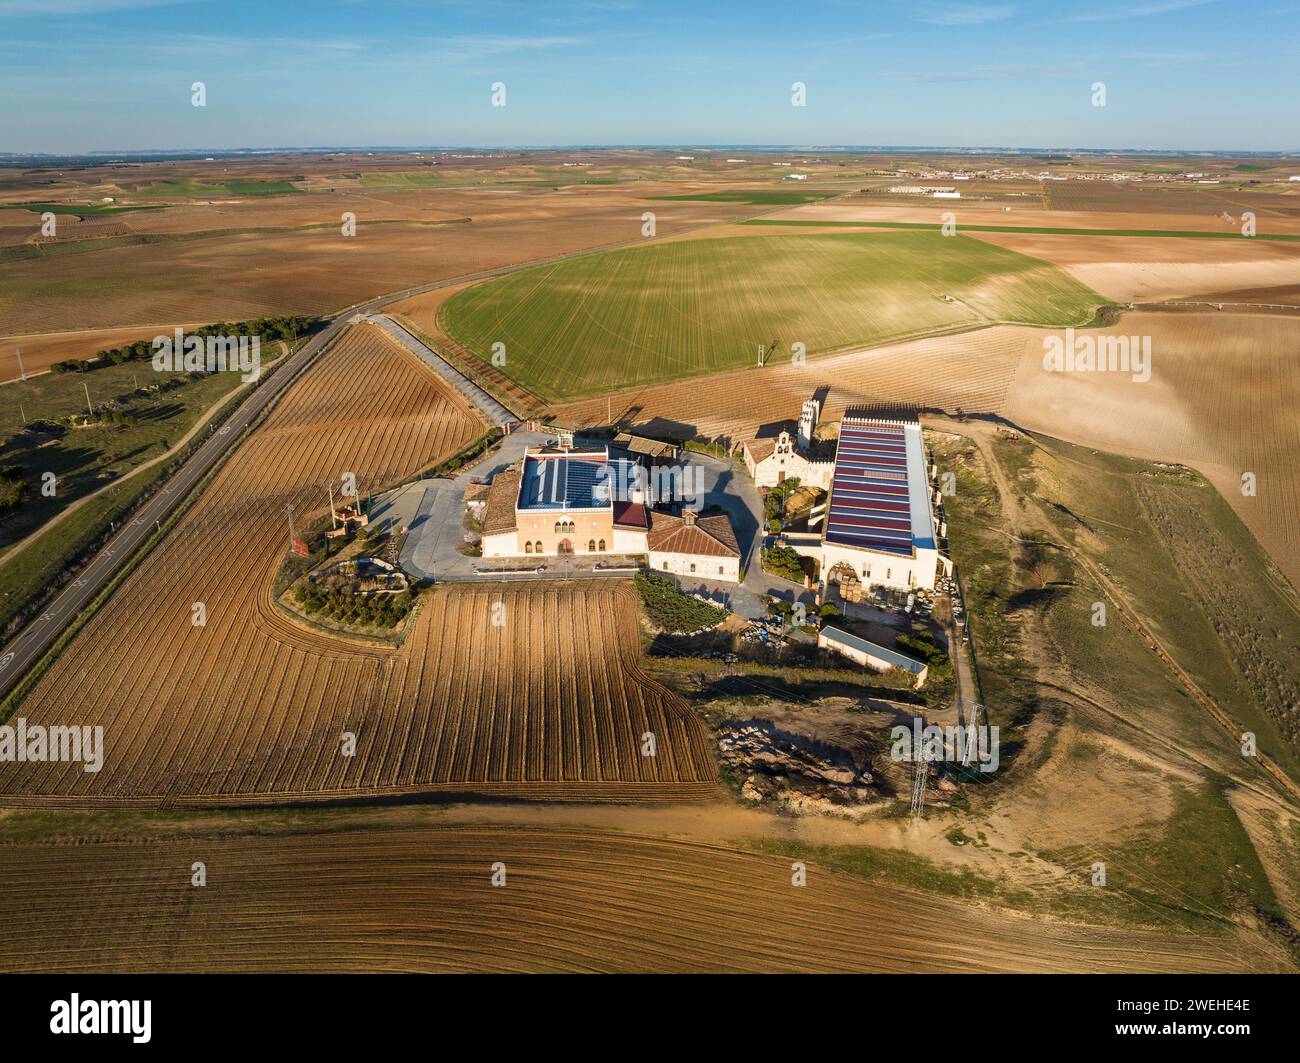 Aerial view of a winery in the outskirts of the Spanish town of Rueda in Valladolid, famous for its vineyards and wines. Stock Photo